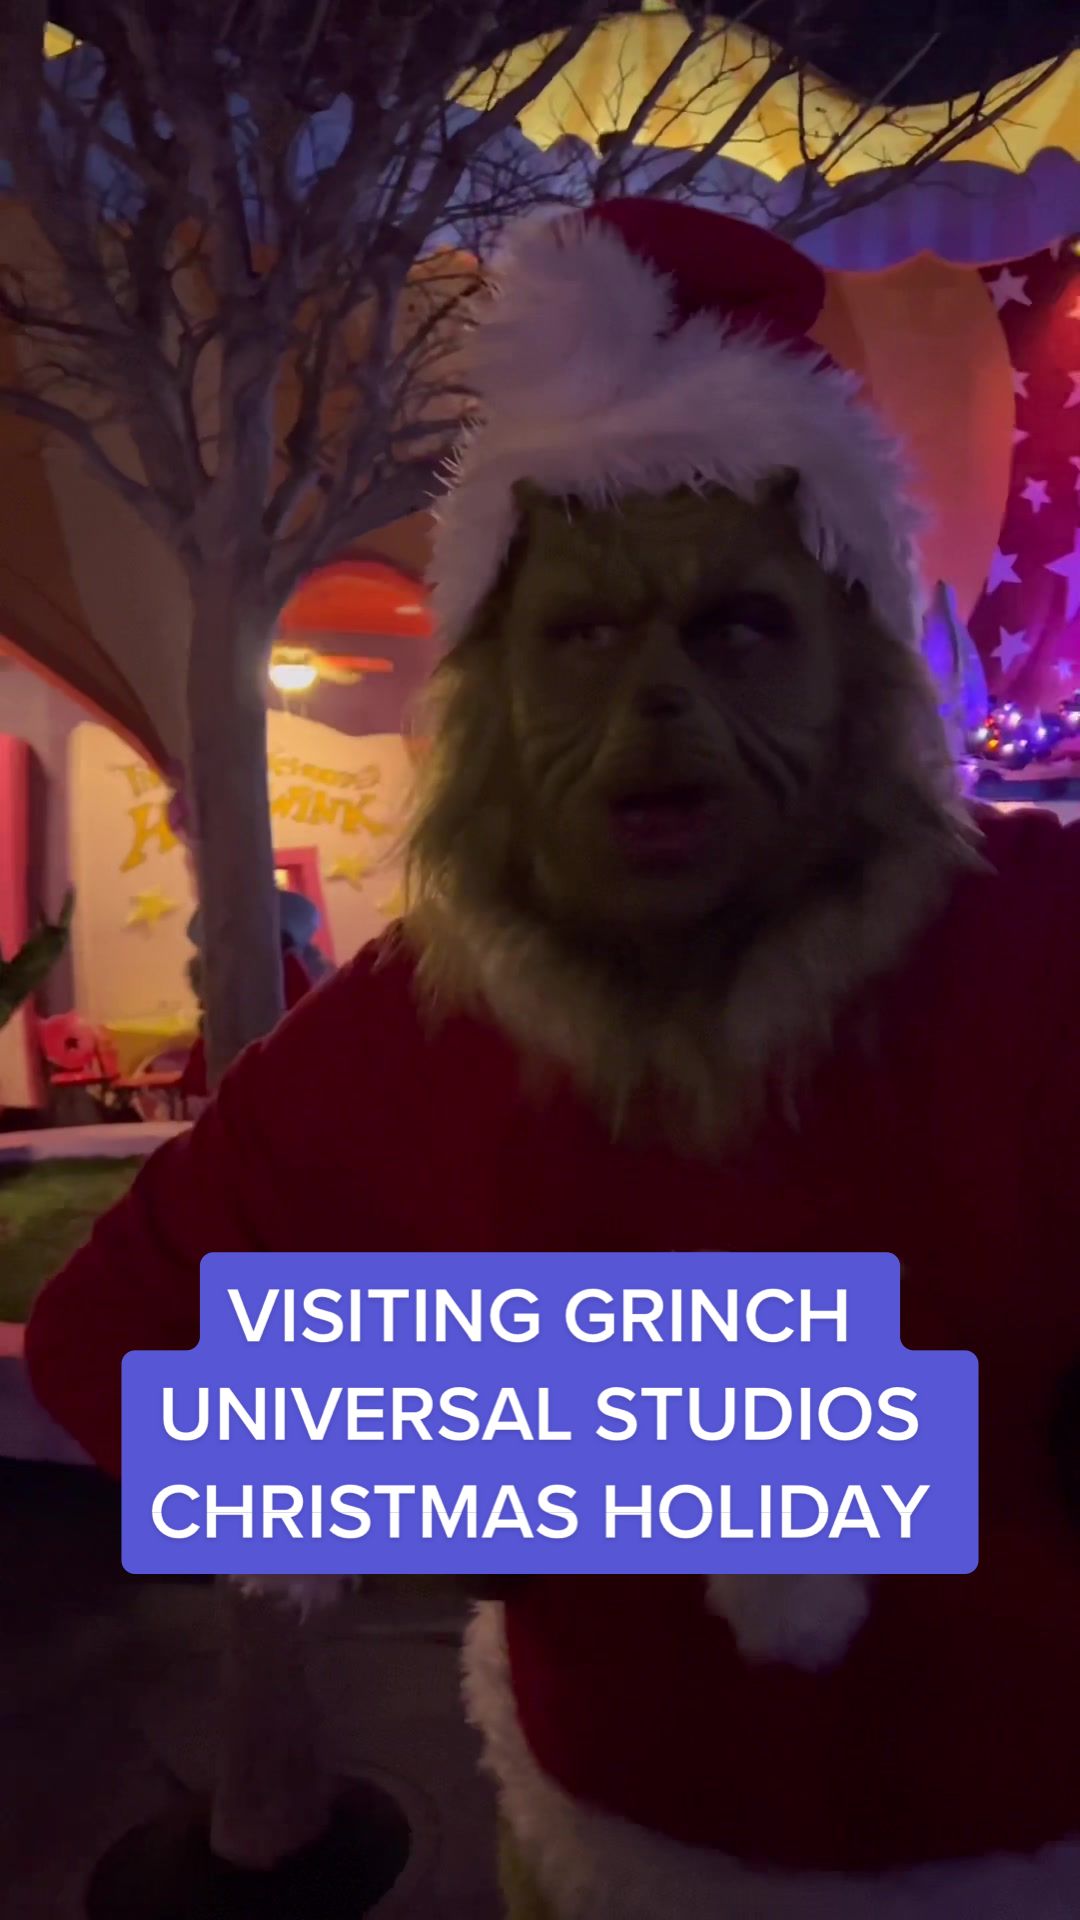 Visited the Grinch and gave him a Christmas present! Universal Studios Grinchmas Christmas Holiday Must Do! 🤣 #Universal #UniversalStudios #UniversalOrlando #Grinch #Grinchmas #TheGrinch #GrinchTikTok #GrinchTok #Christmas #Holiday #Winter #ChristmasTikTok #ChristmasMovies #DisneyPlus #DisneyWorld #Disneyland #DisneyParks #DisneyTikTok #DisneyTok #DisneyAdult #Vacation #ThemePark #Orlando #Whoville #Comedy 